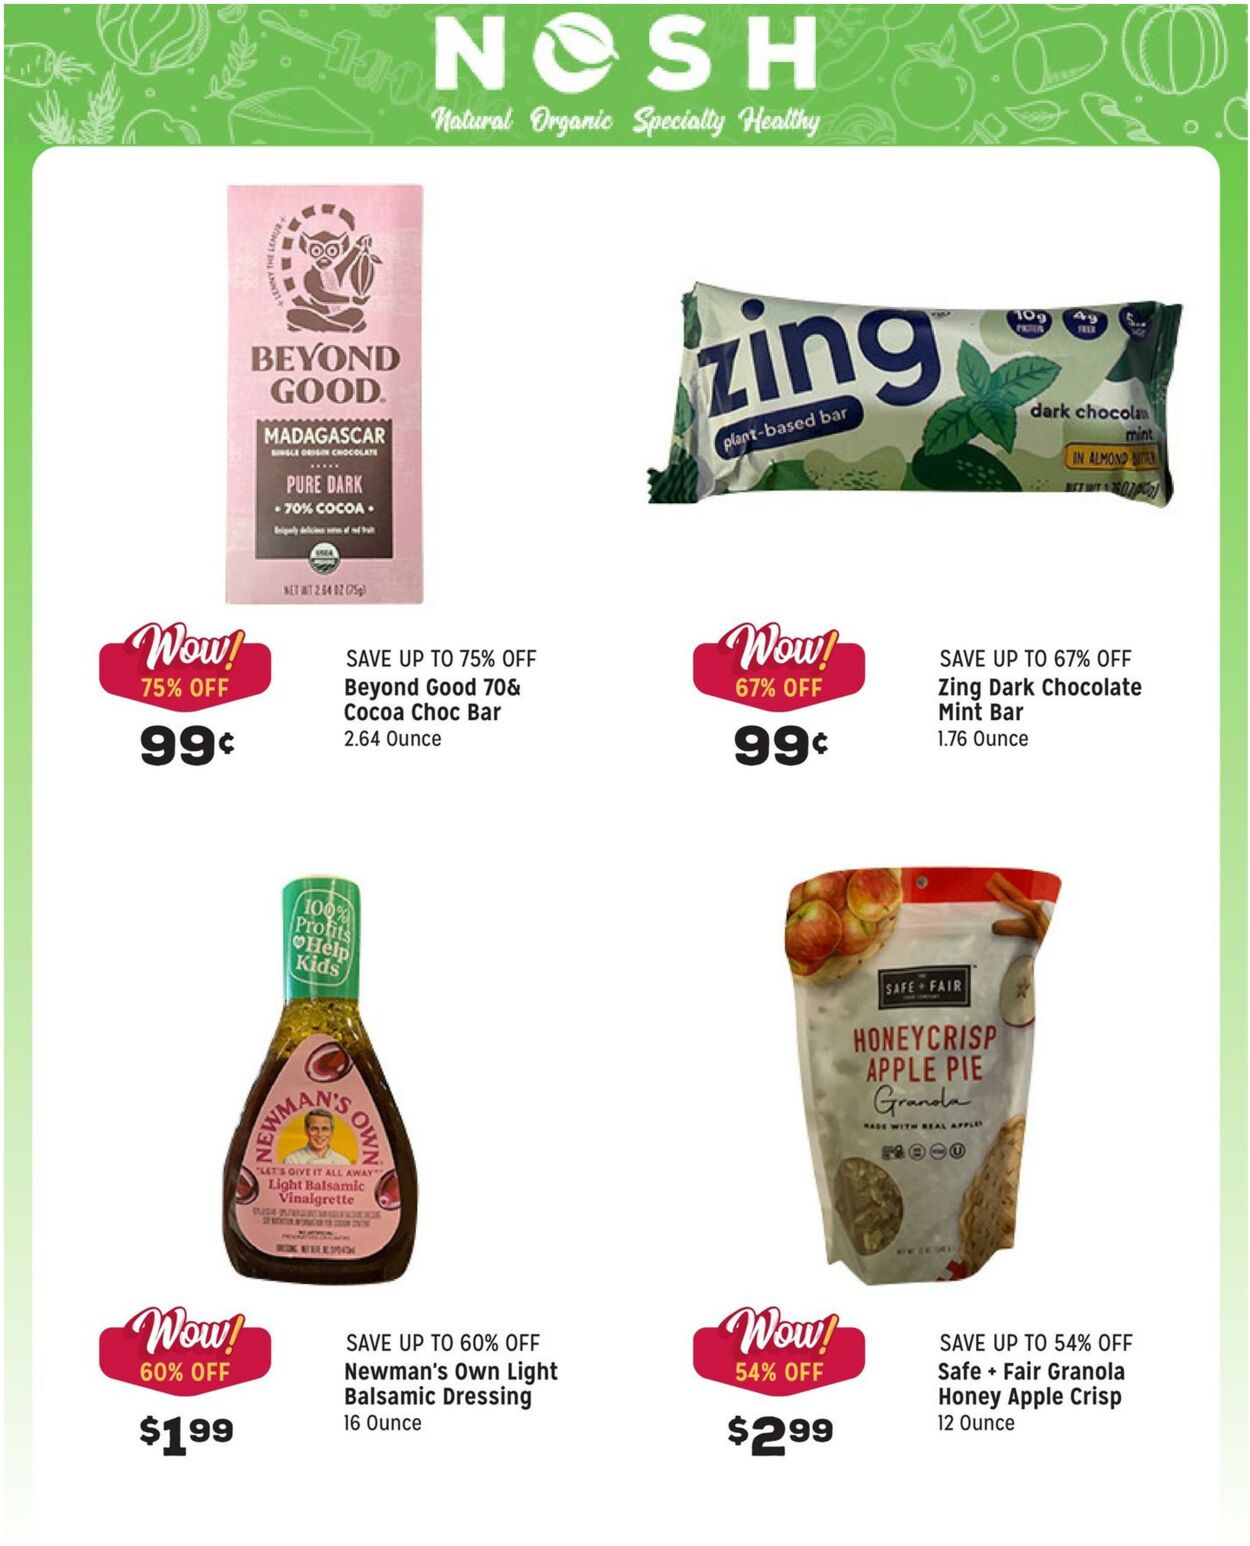 Weekly ad Grocery Outlet 05/31/2023 - 06/06/2023